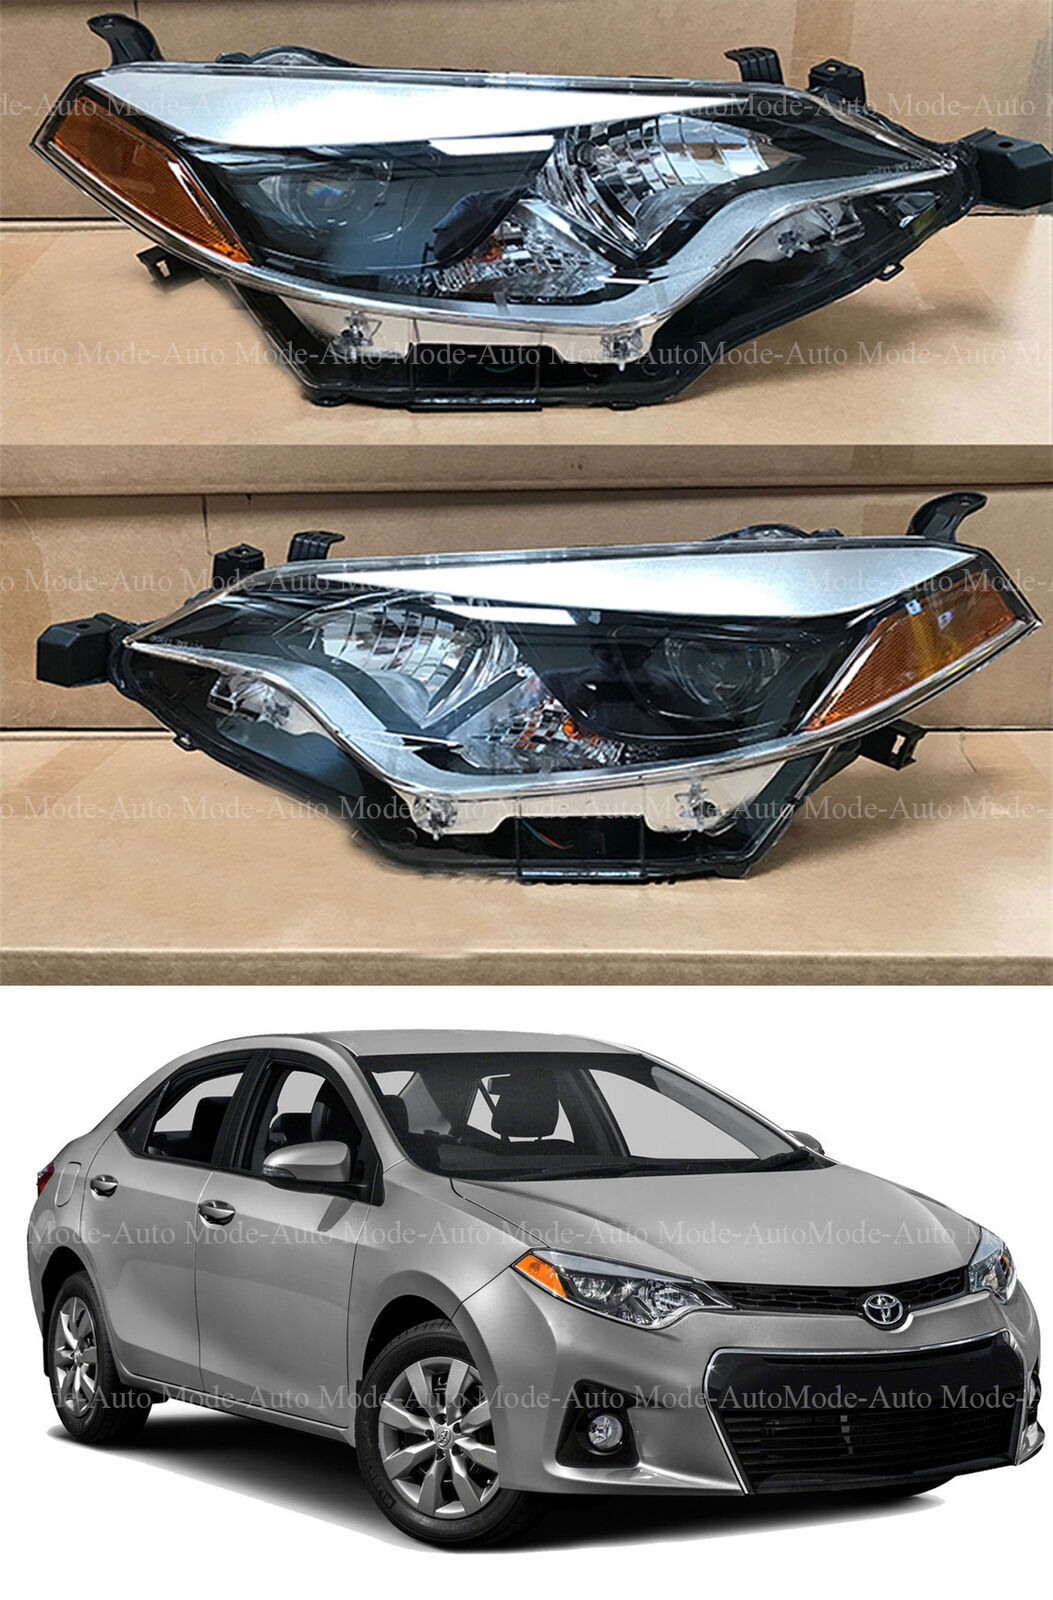 LED Headlight Assembly for 2014 2015 2016 Toyota Corolla Left Right 2pc Pair Set